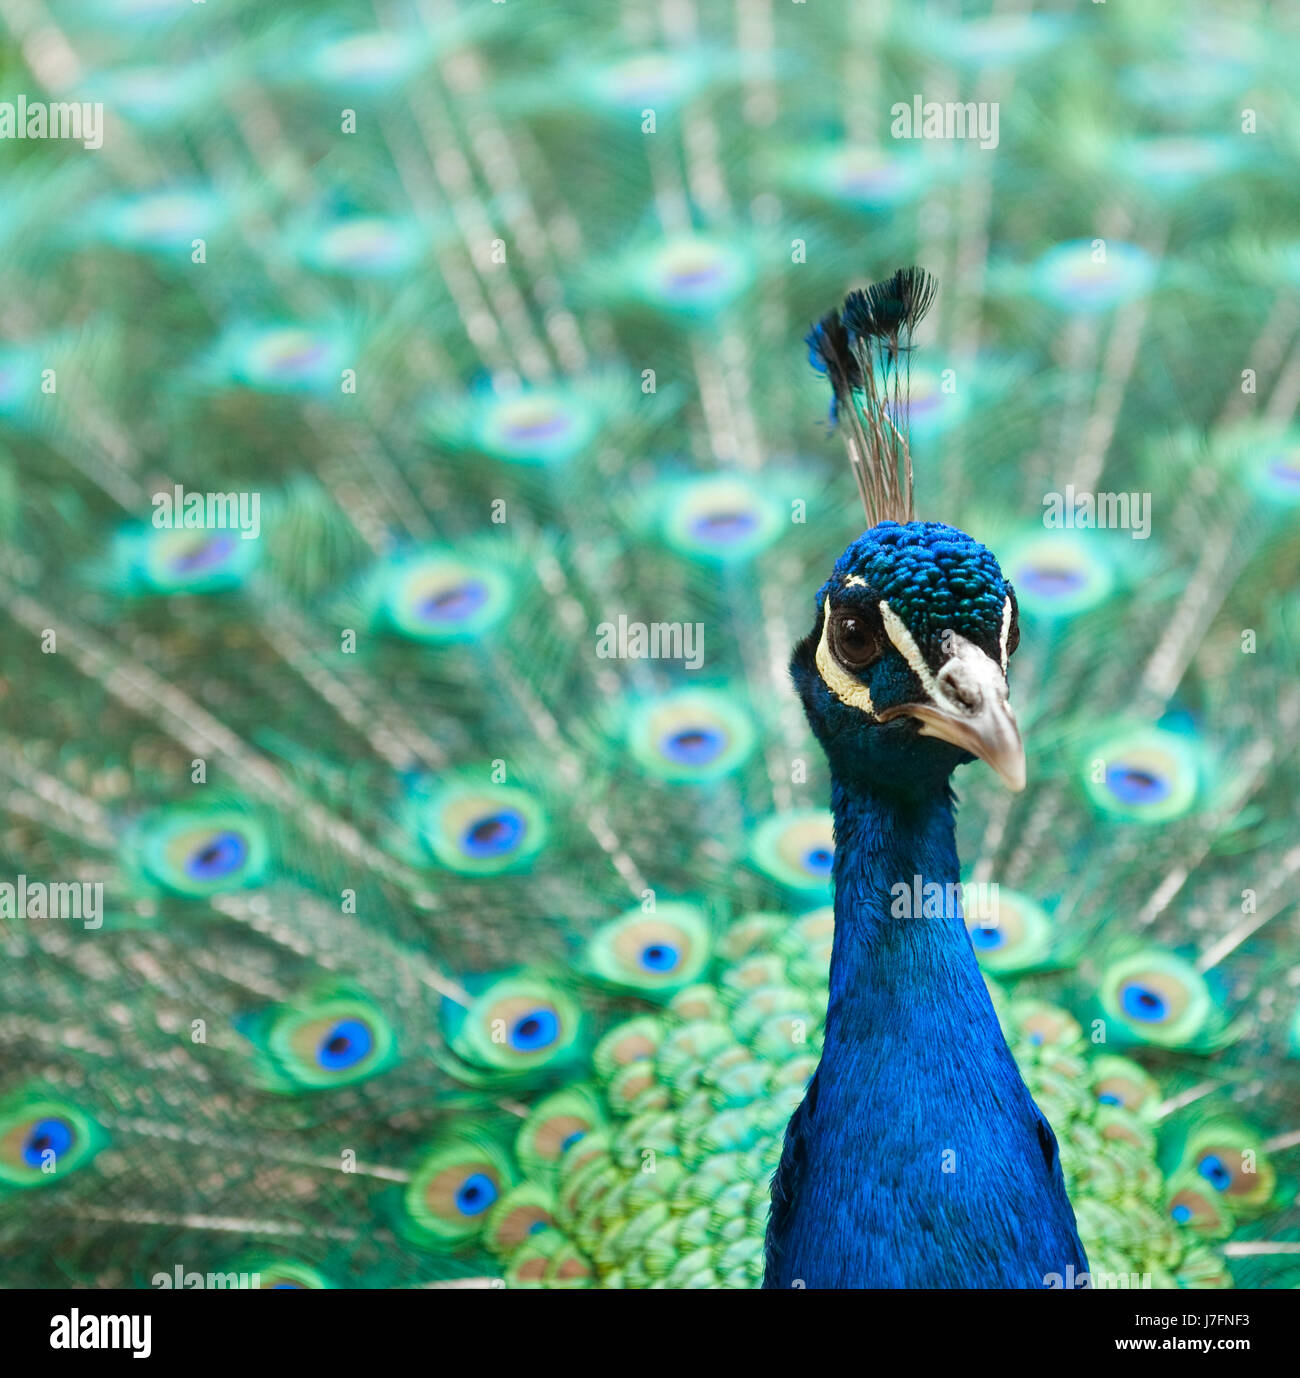 animal bird feathers tail open peacock uncap colorful colors colours blue Stock Photo